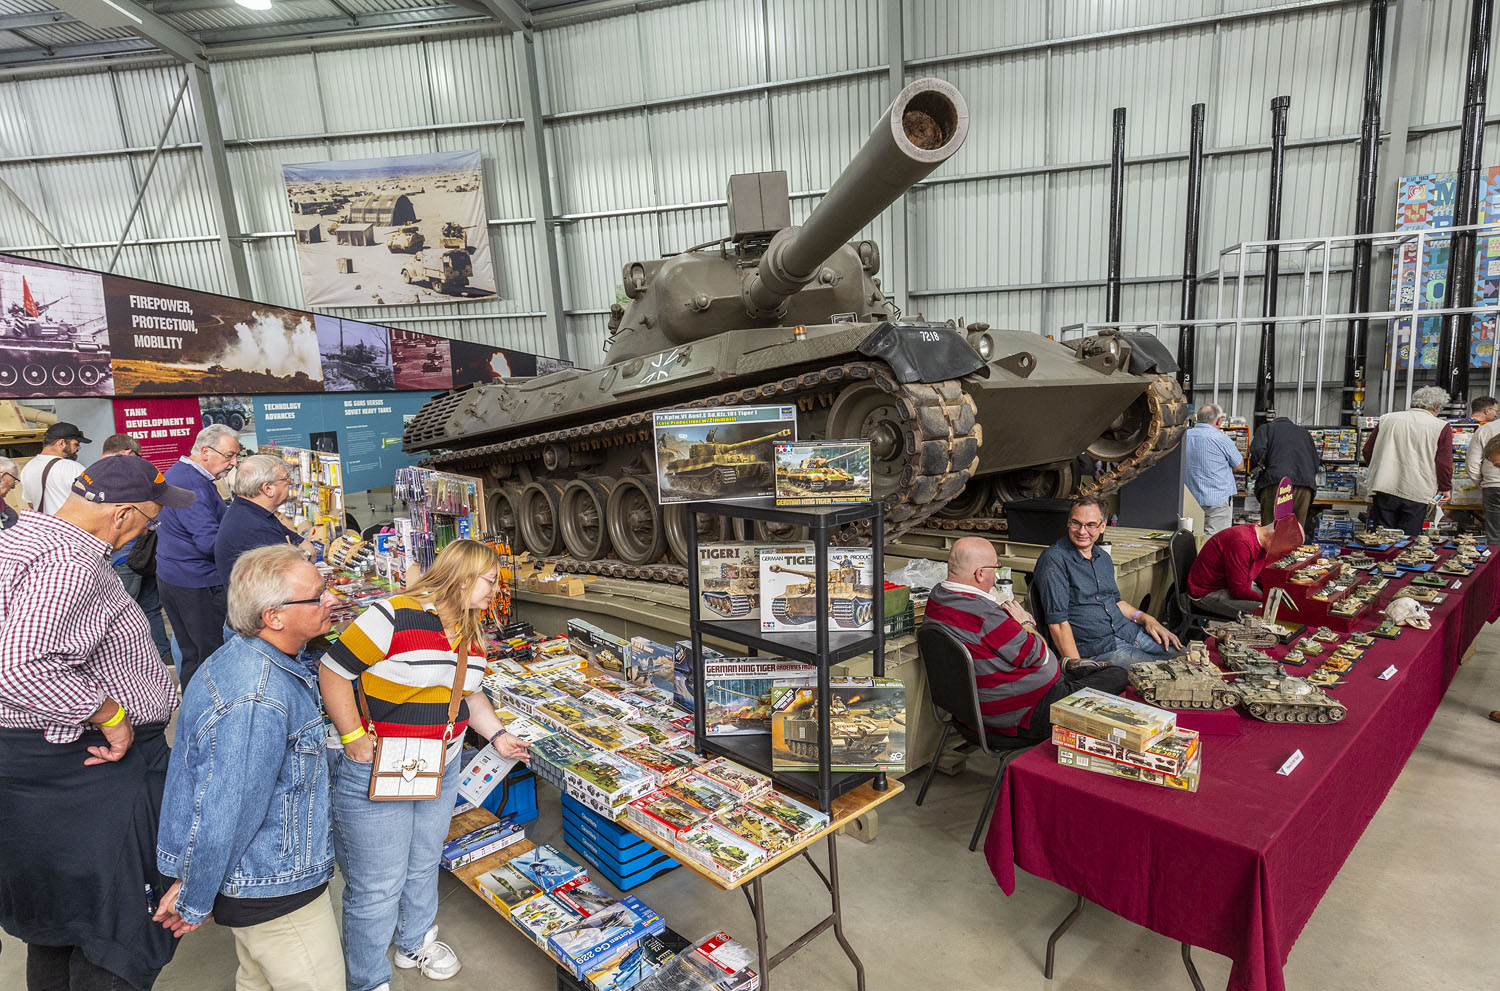 The South West Model Show at The Tank Museum.